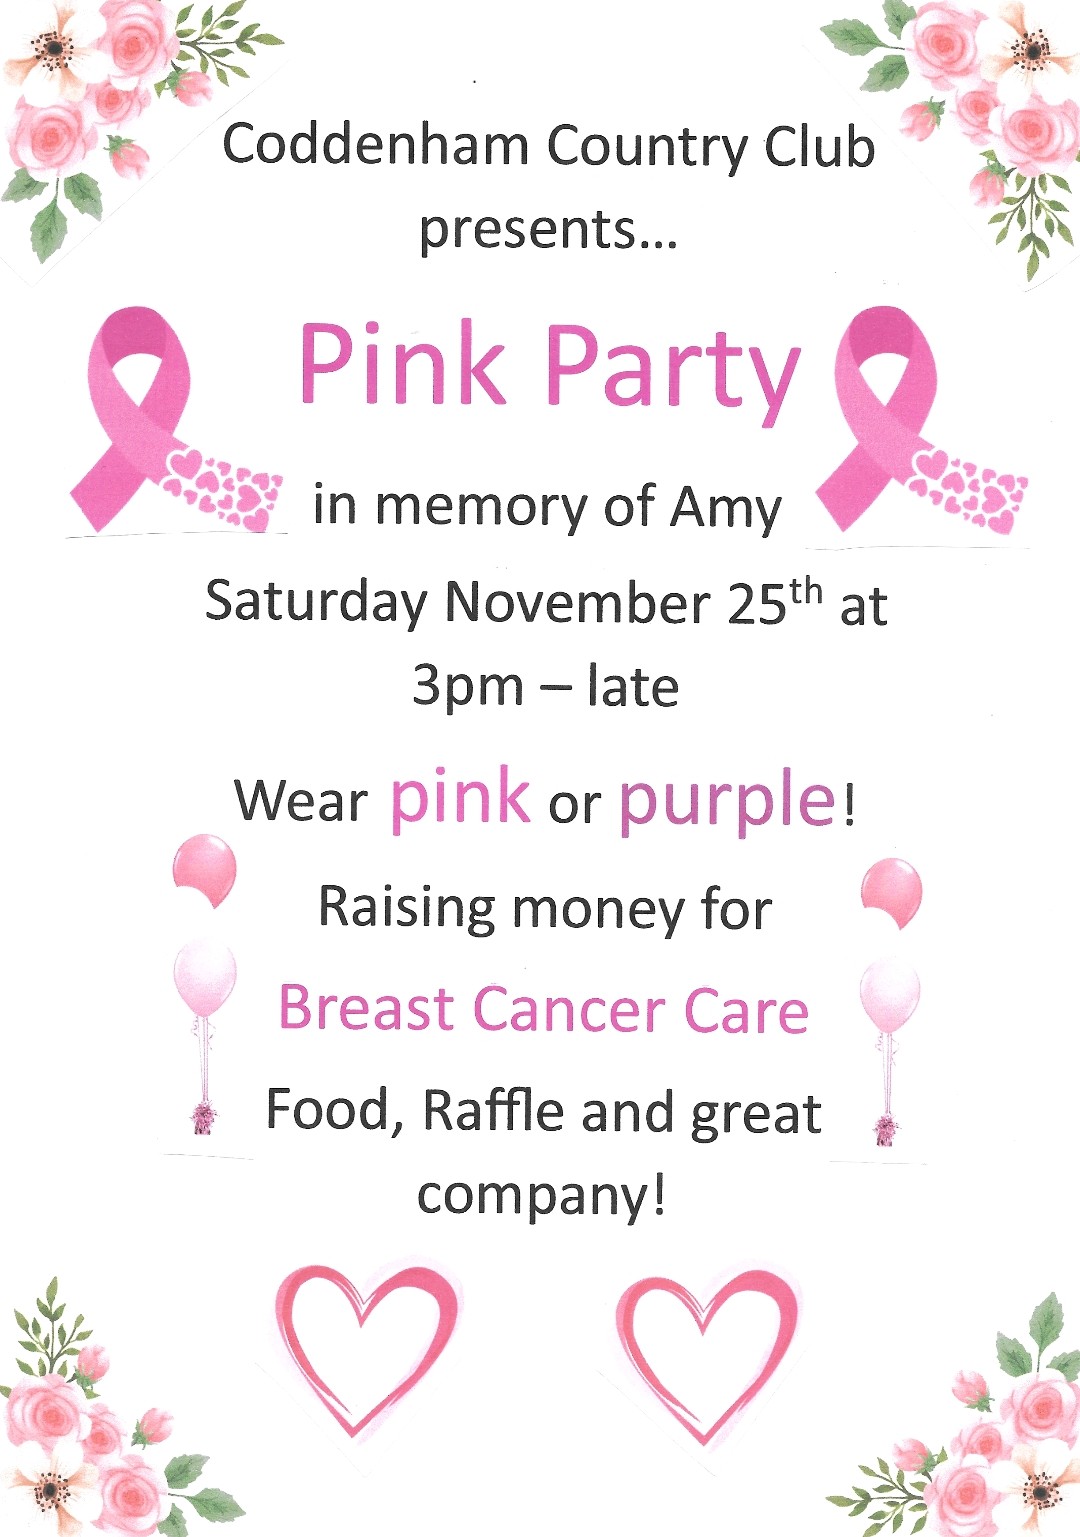 Pink Party Poster CCC